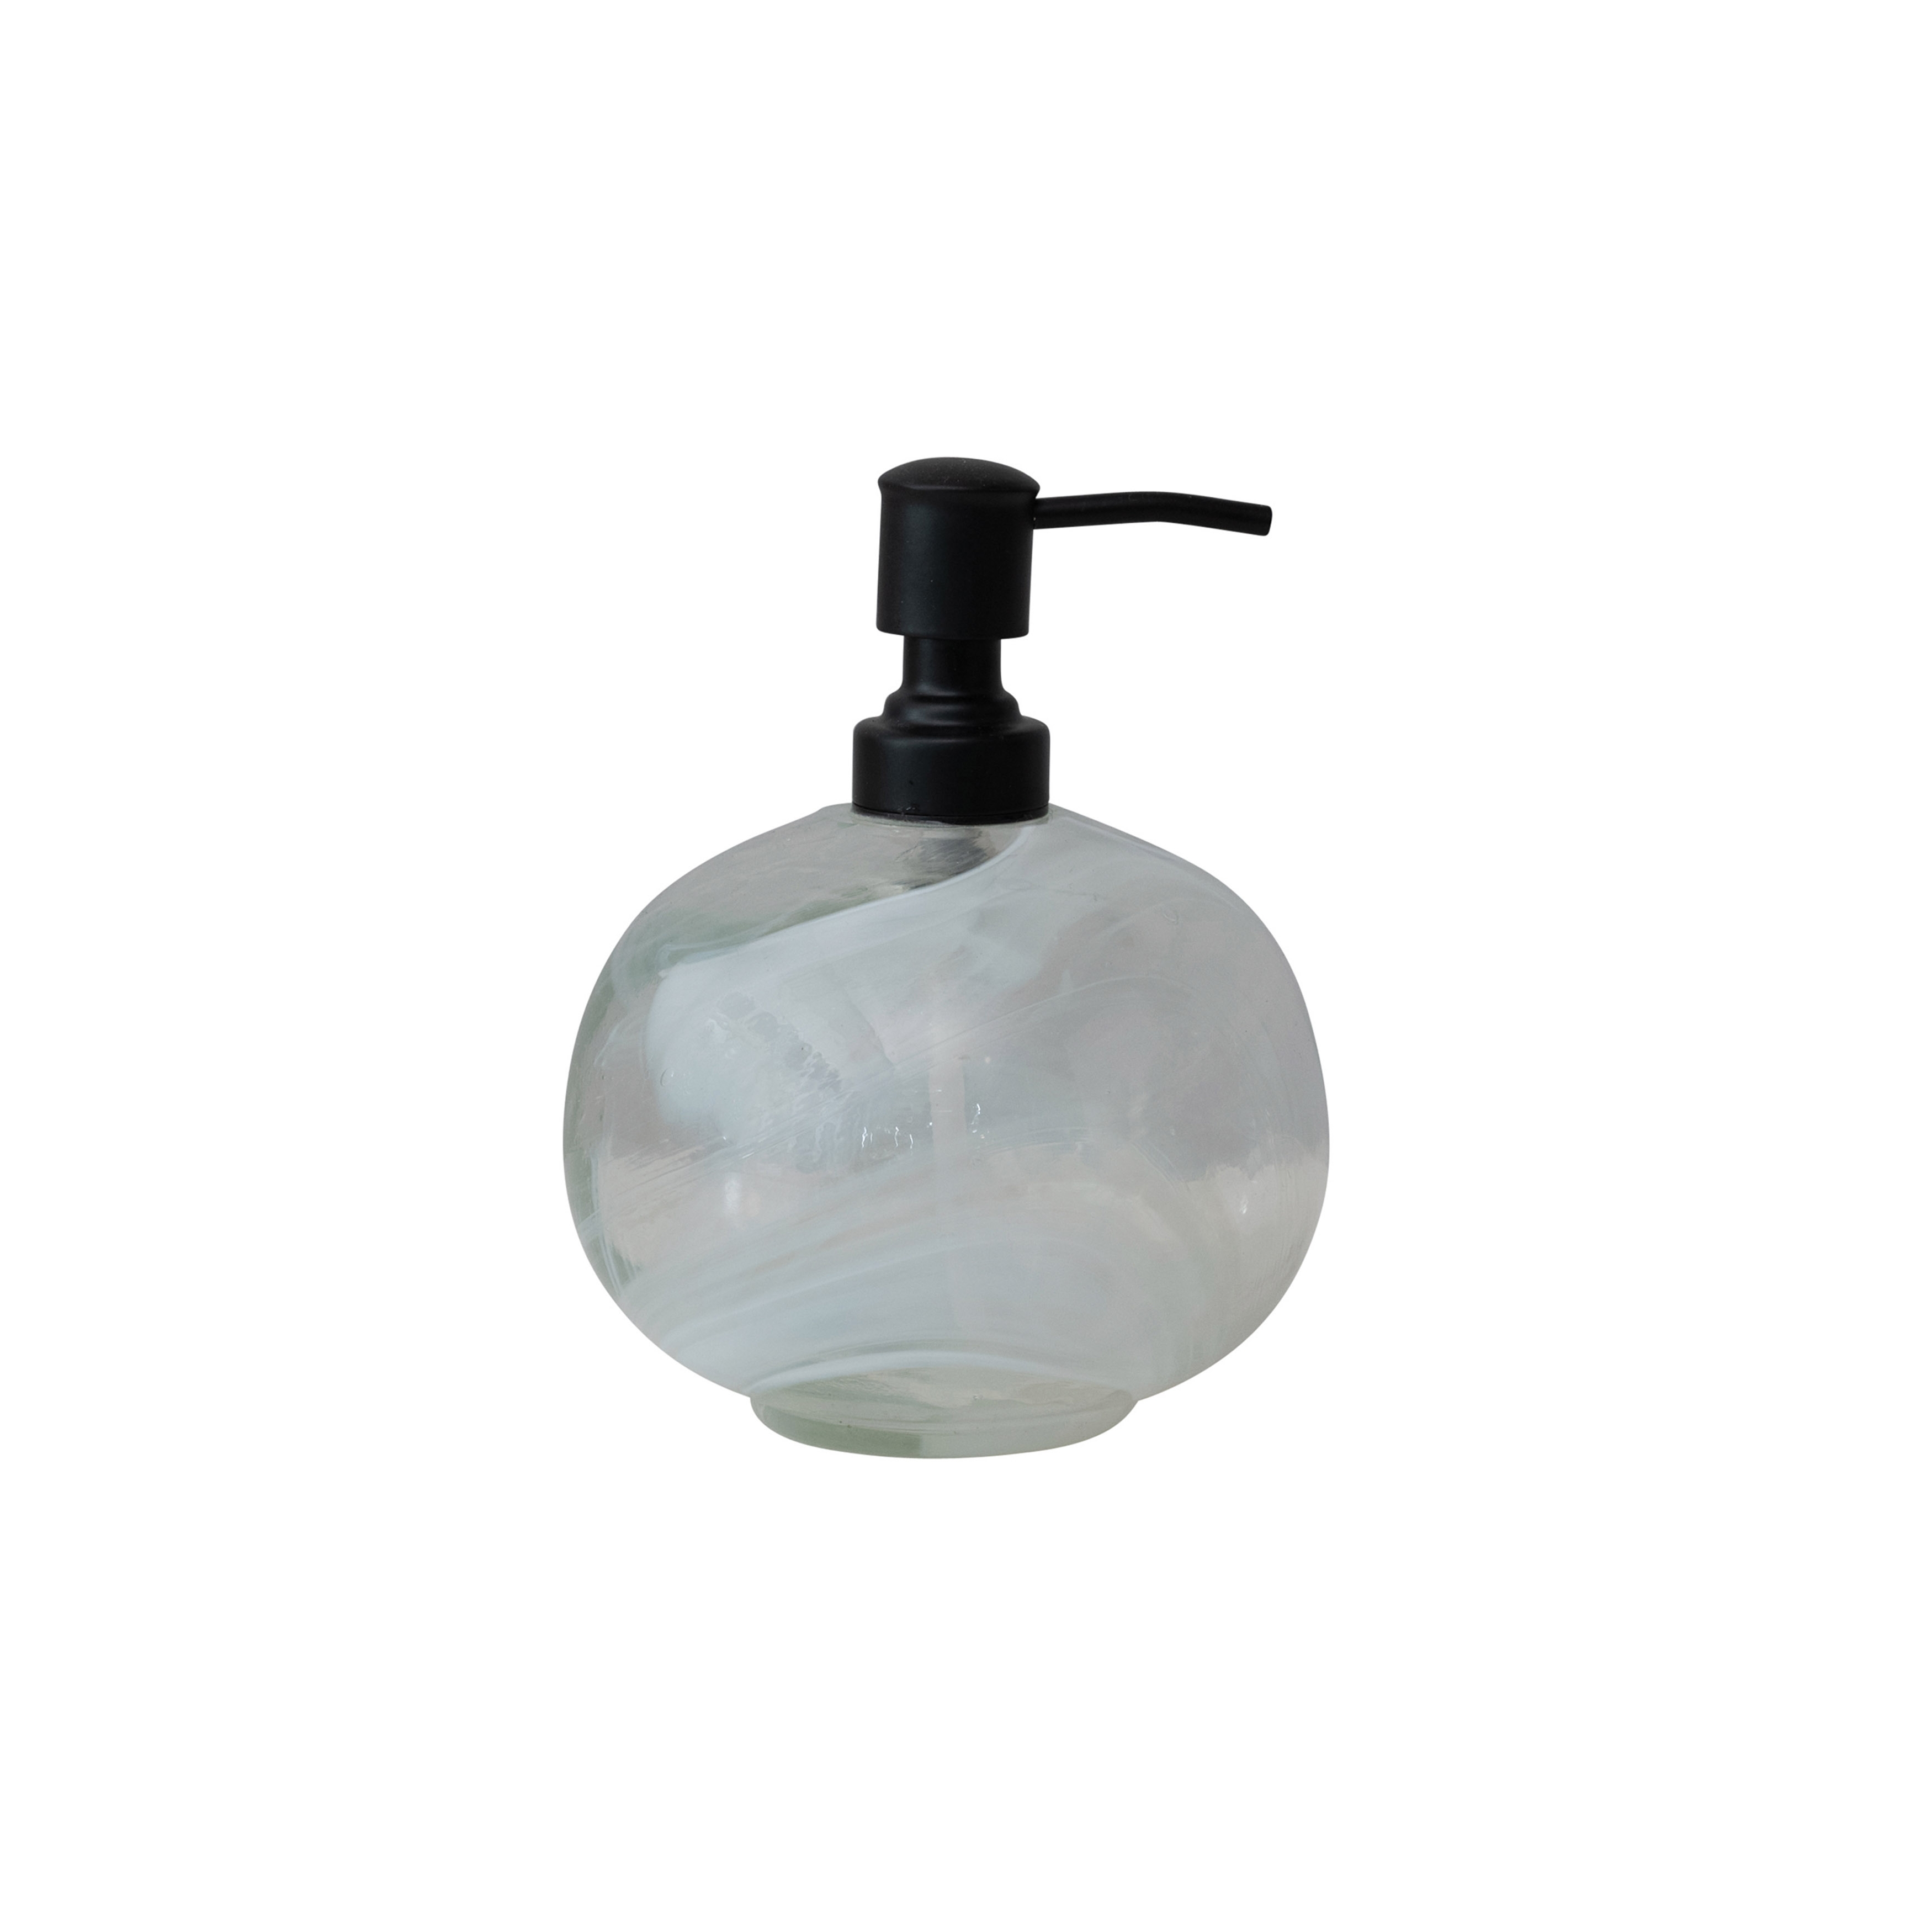  Marbled Glass Soap Dispenser with Pump, White and Black - Image 0